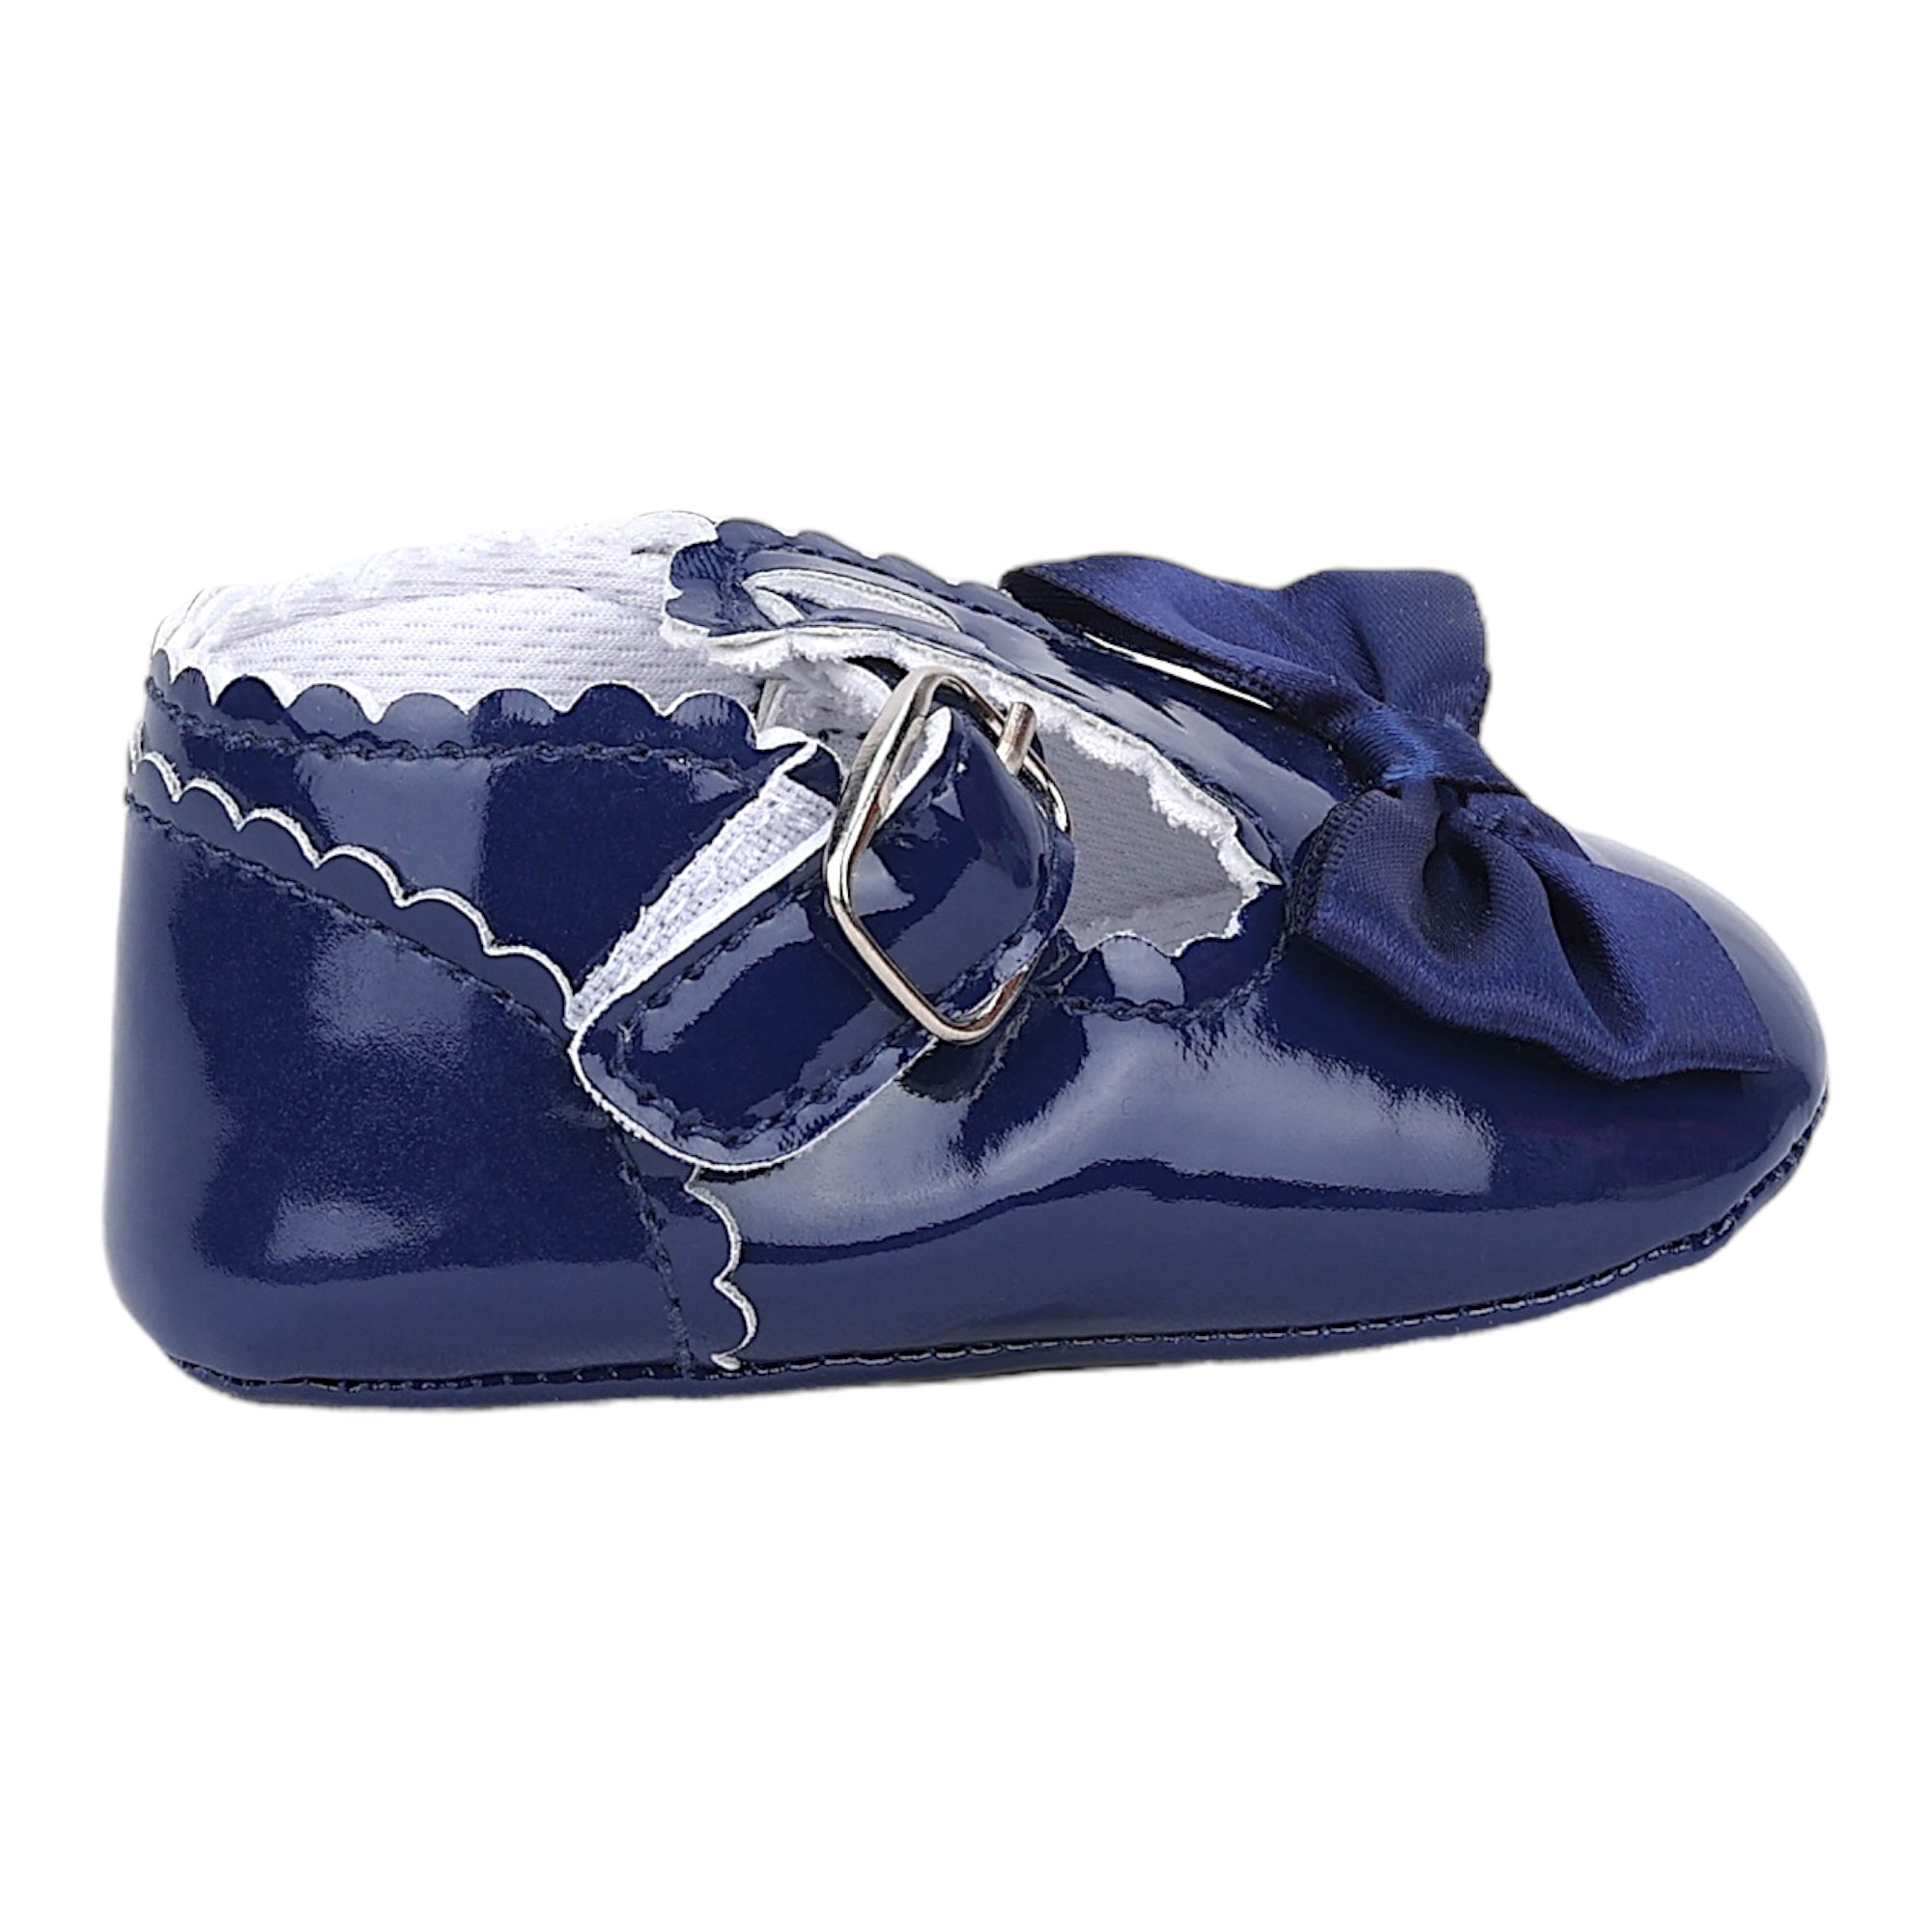 Baby Moo Mary Jane Bow Patent Leather Anti-Skid Ballerina Booties - Blue